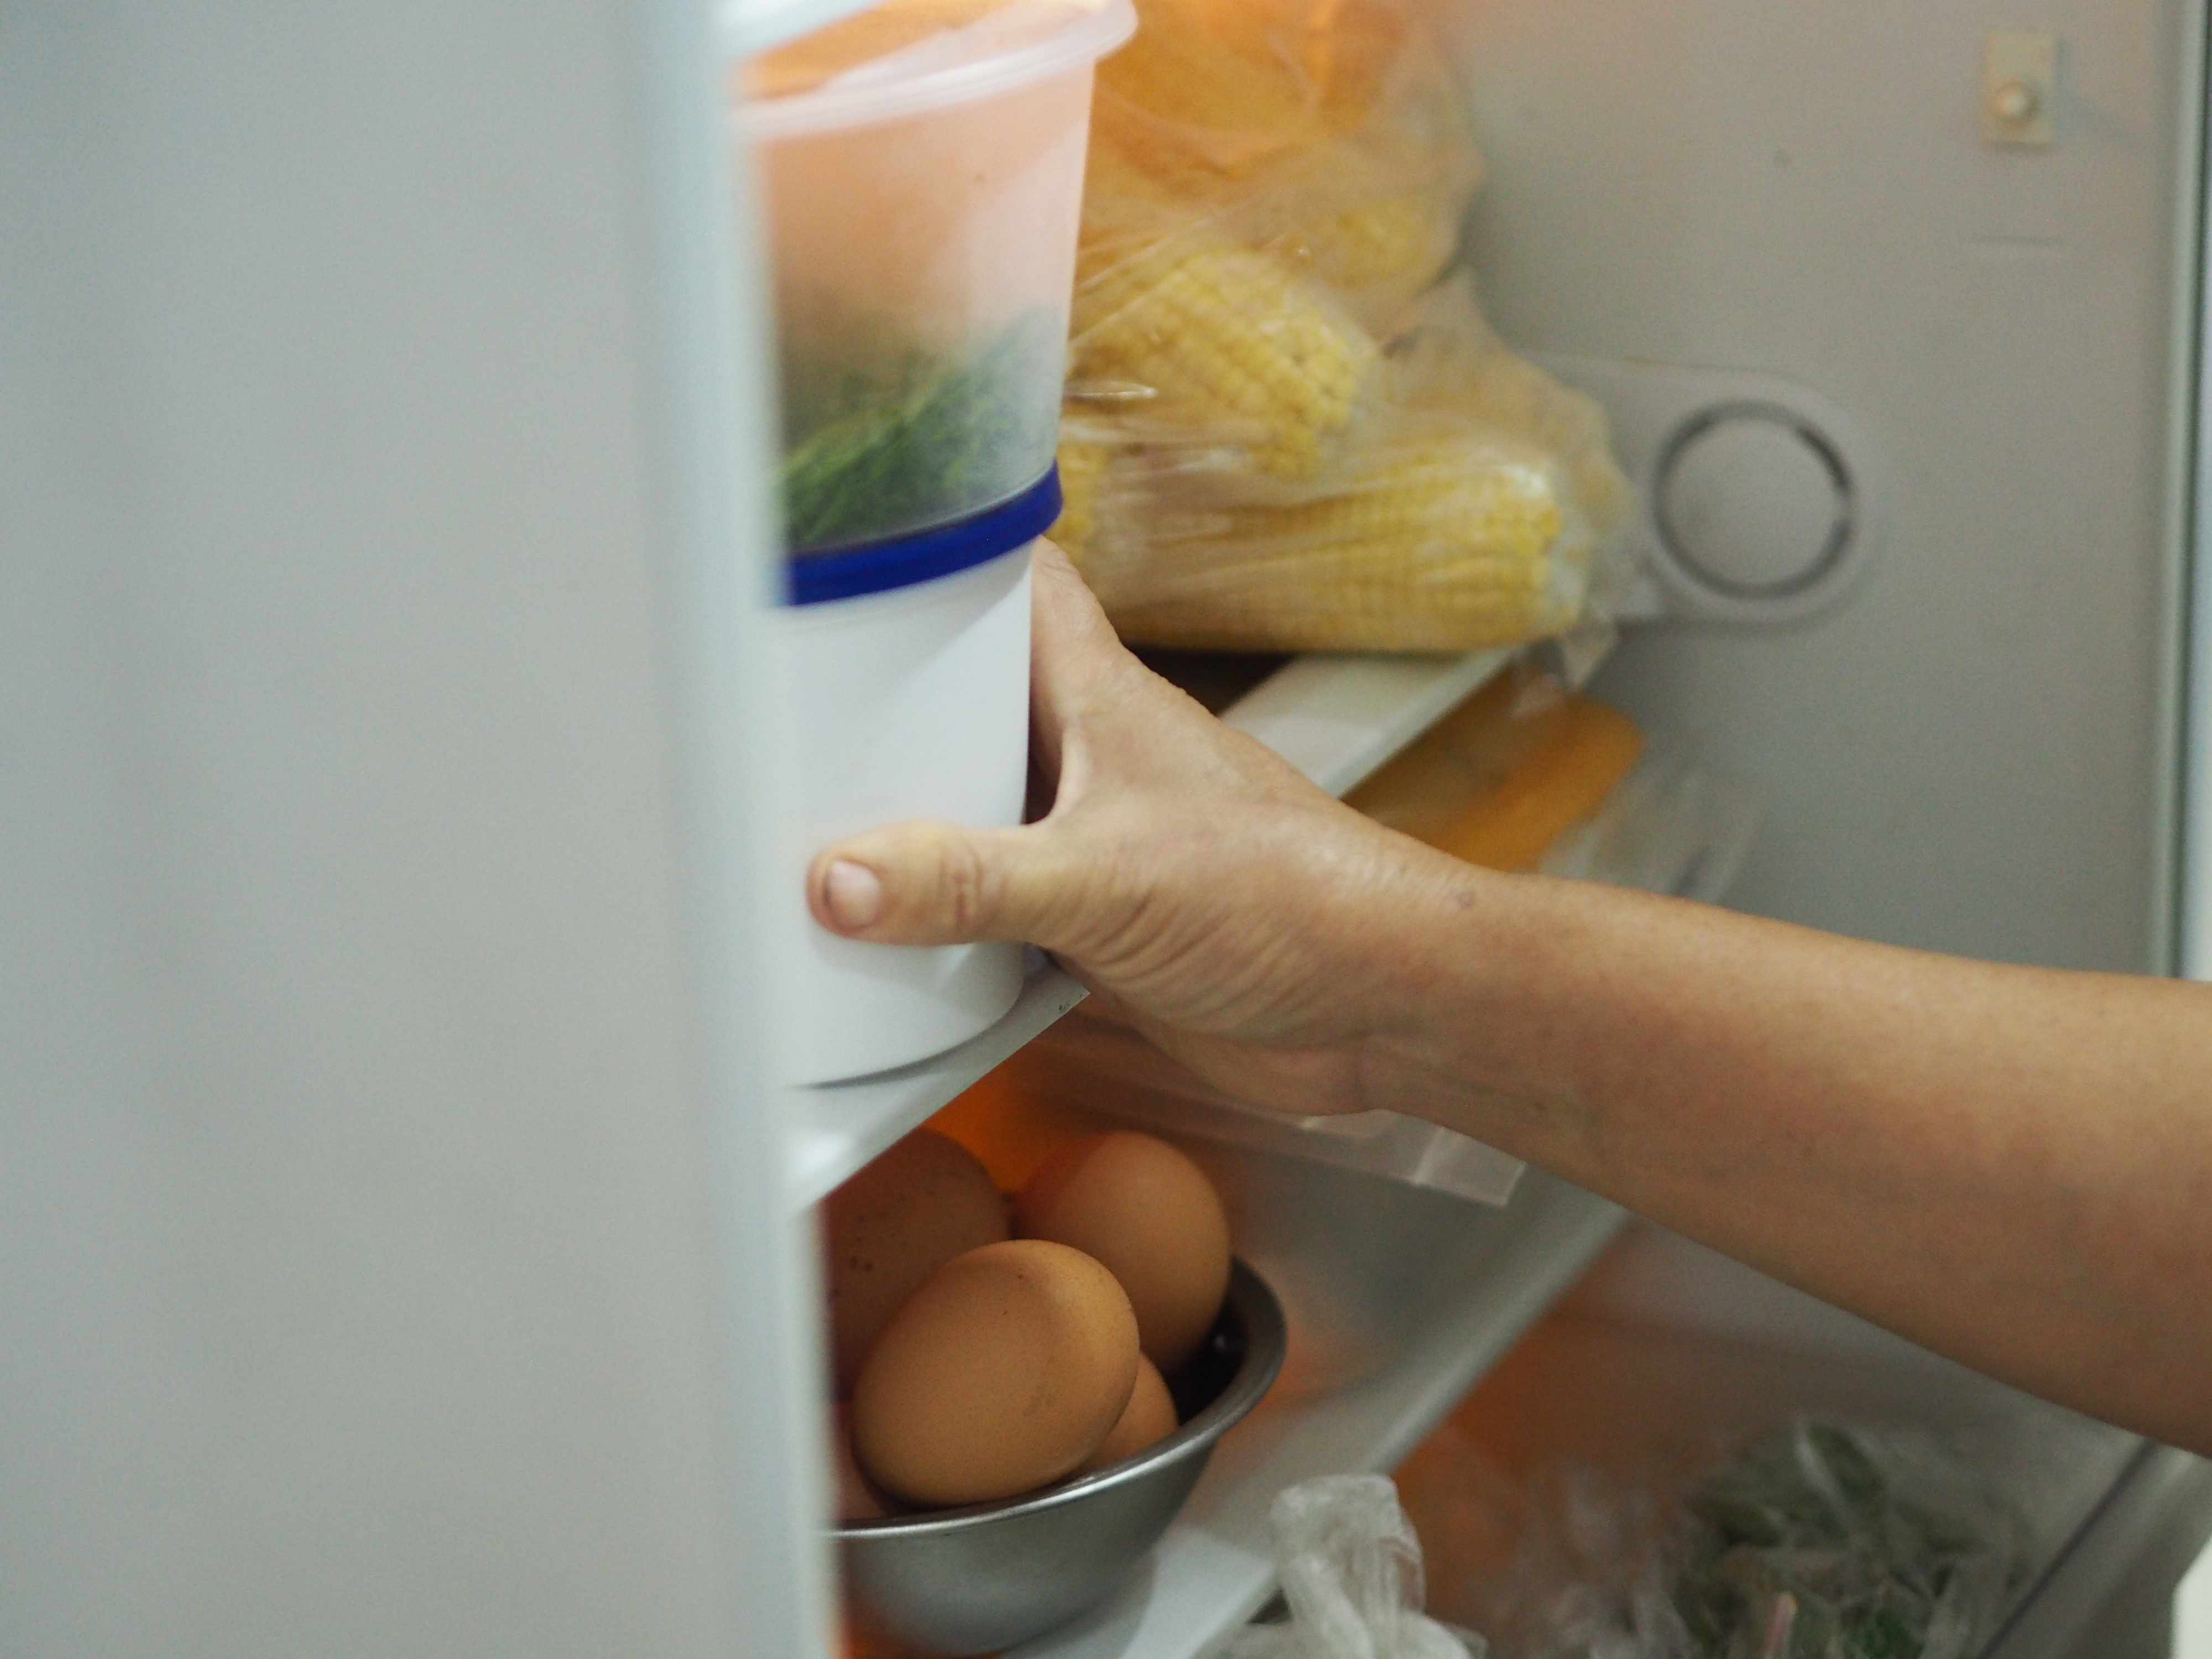 Person&#x27;s hand opening a refrigerator stocked with eggs and vegetables, implying budget-friendly meal planning